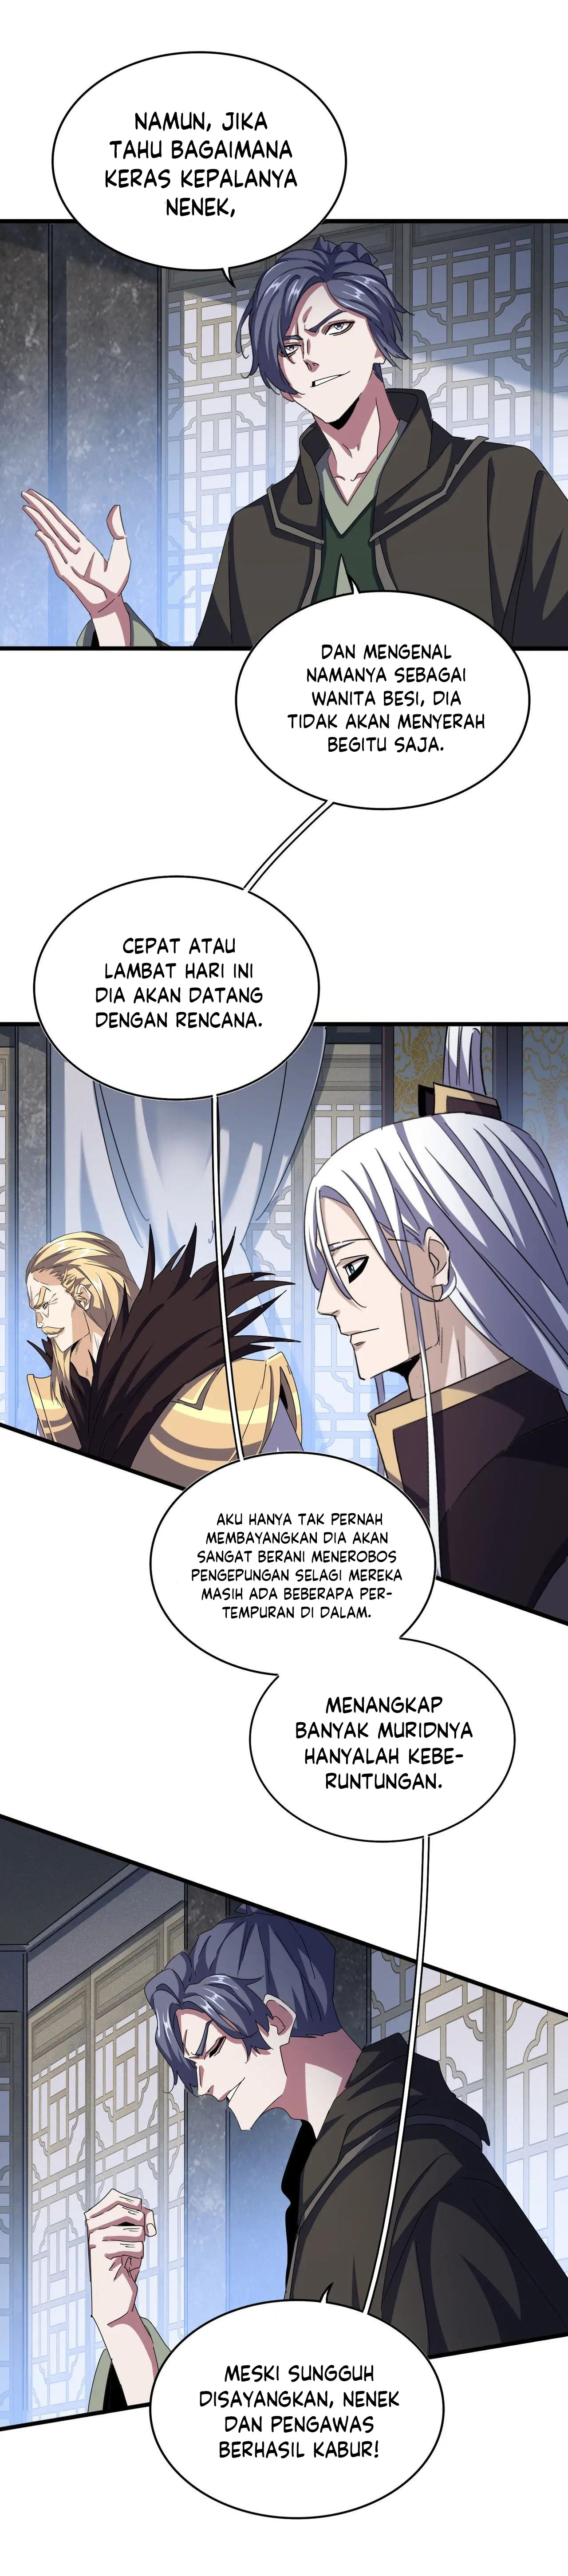 Magic Emperor Chapter 464 Image 6